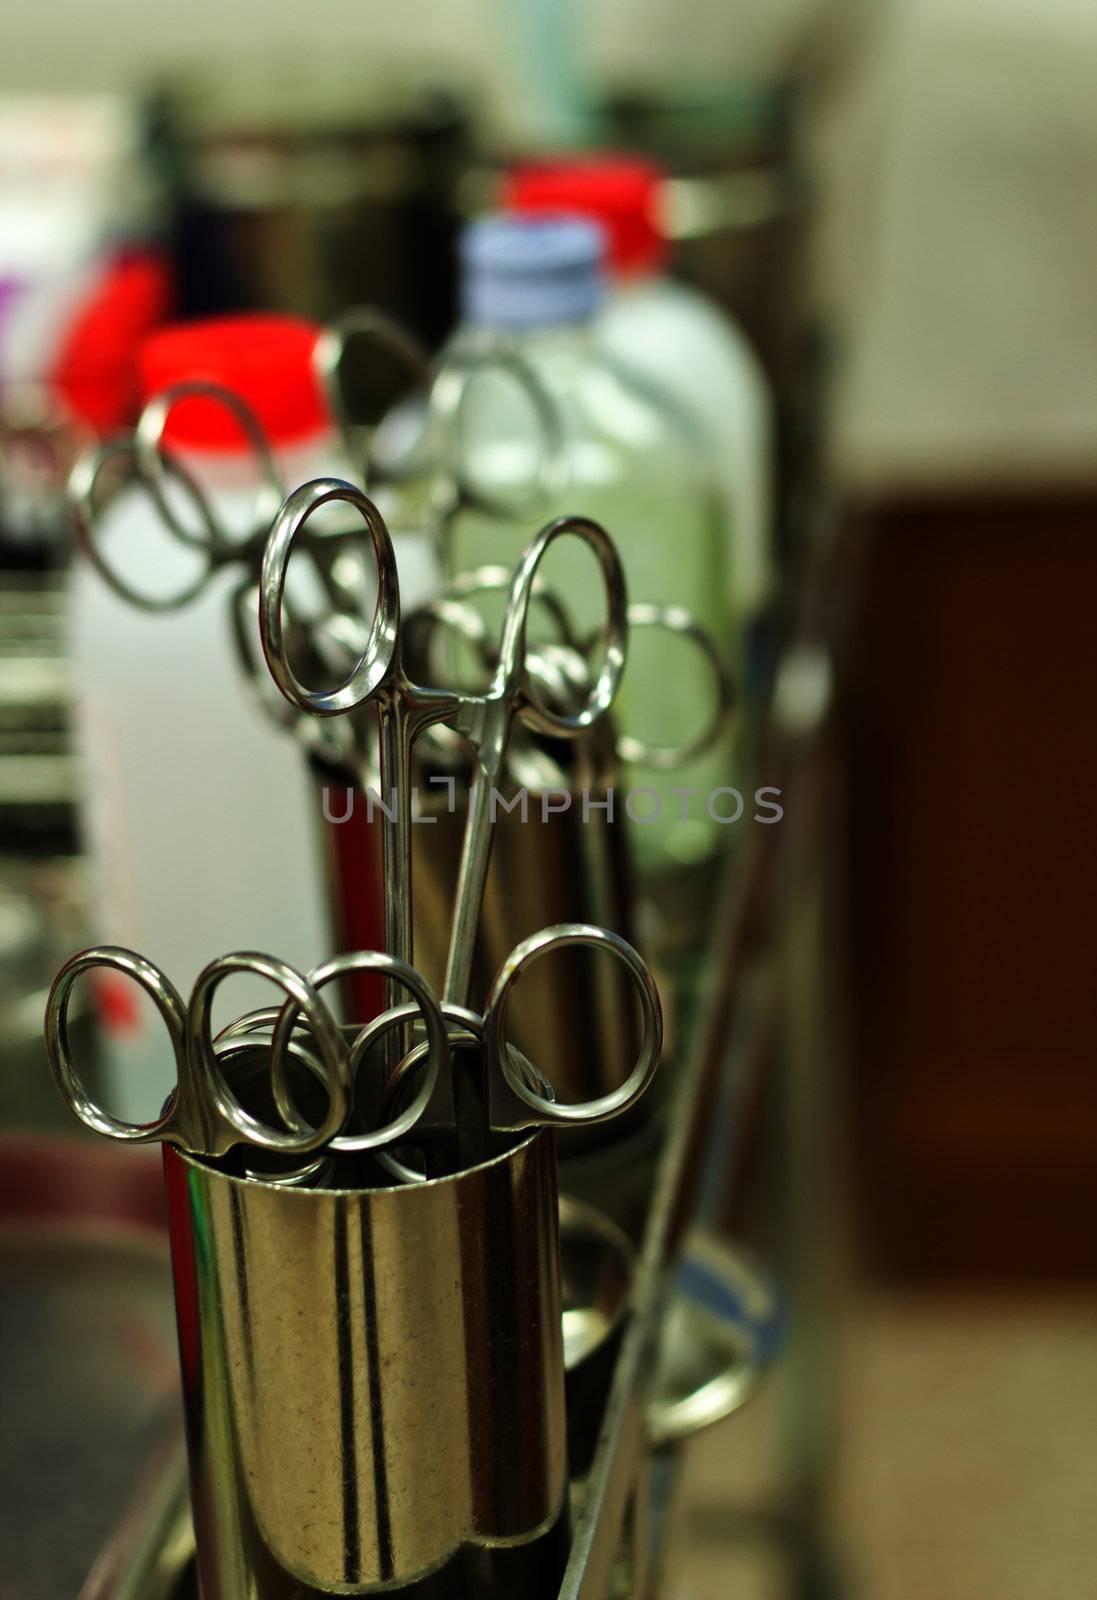 Scissors for physicians by den_rutchapong